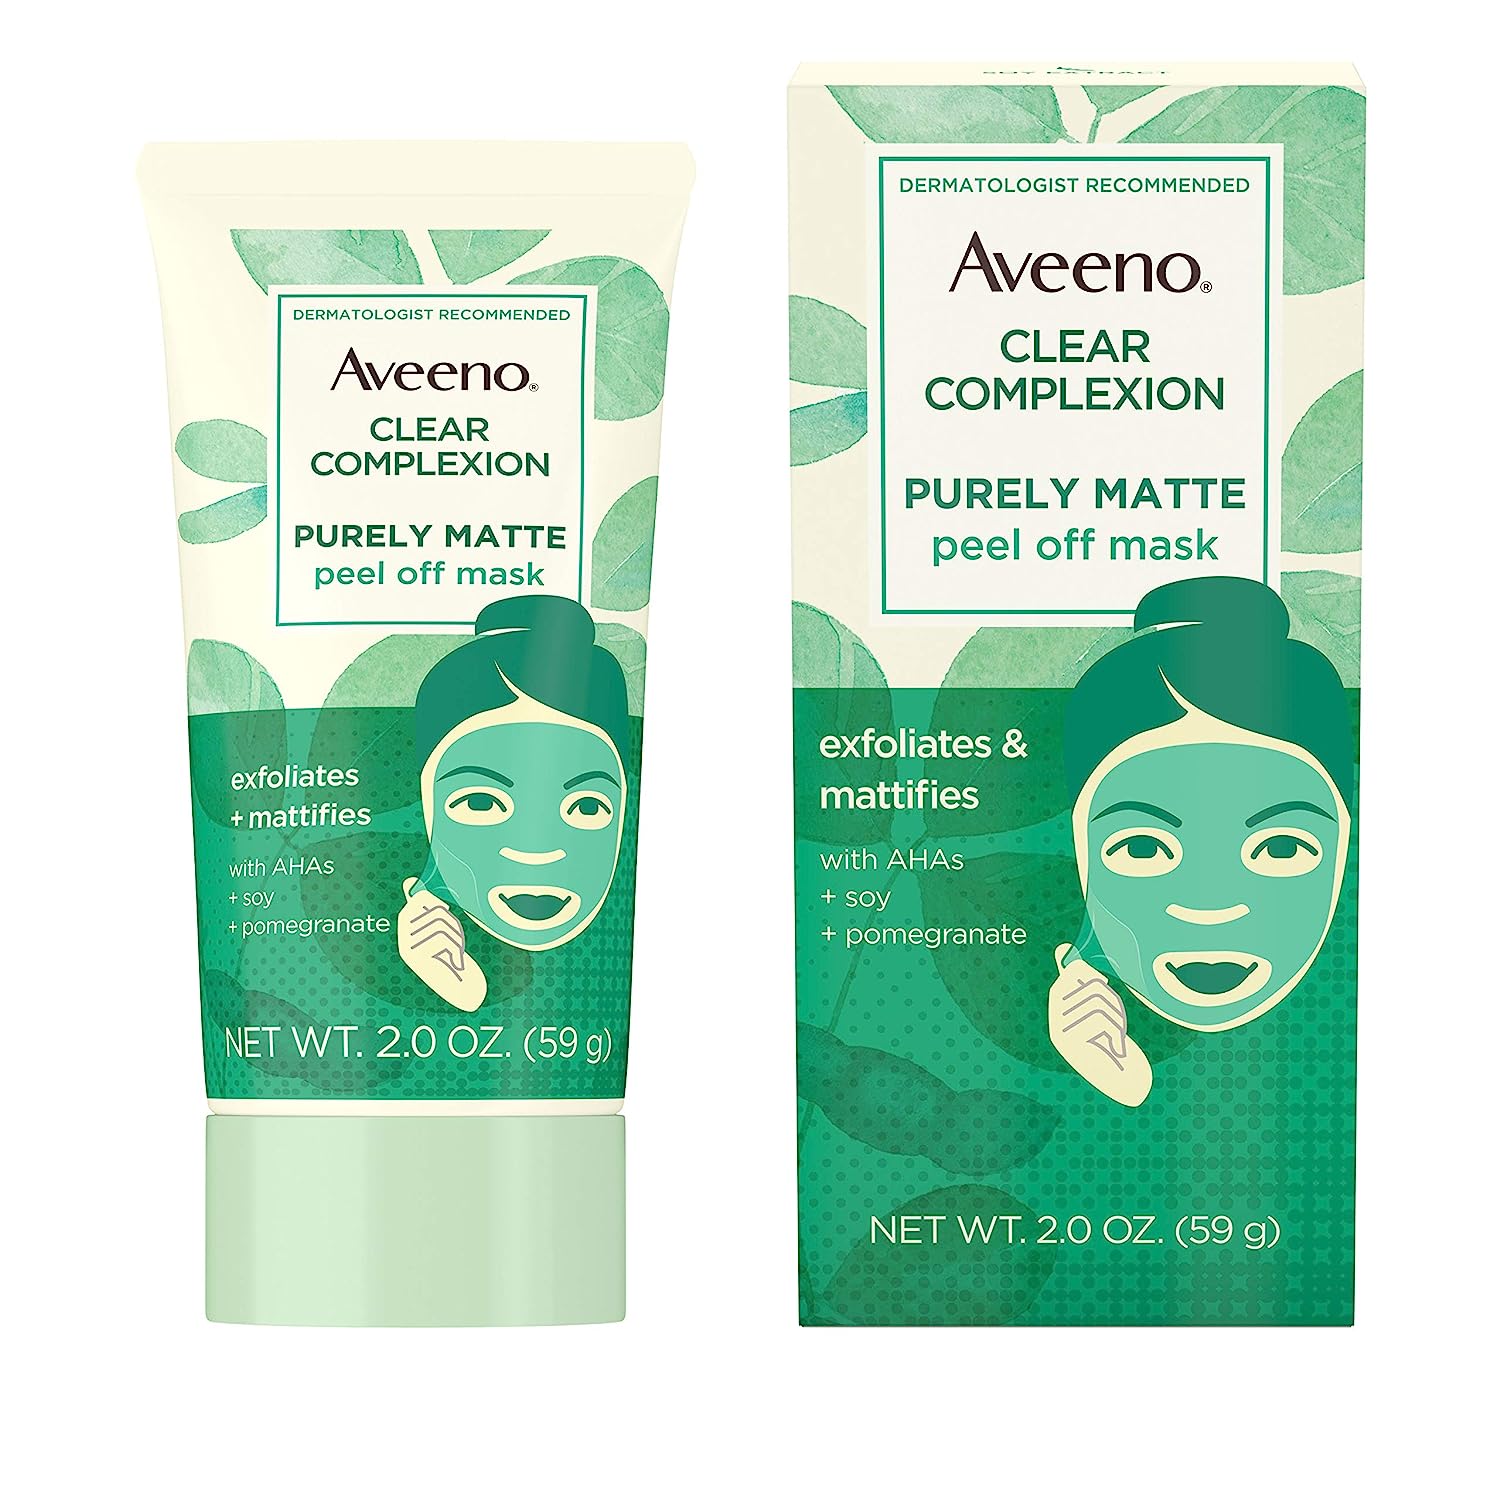 Aveeno CLEAR COMPLEXION PURELY MATTE peel off mask